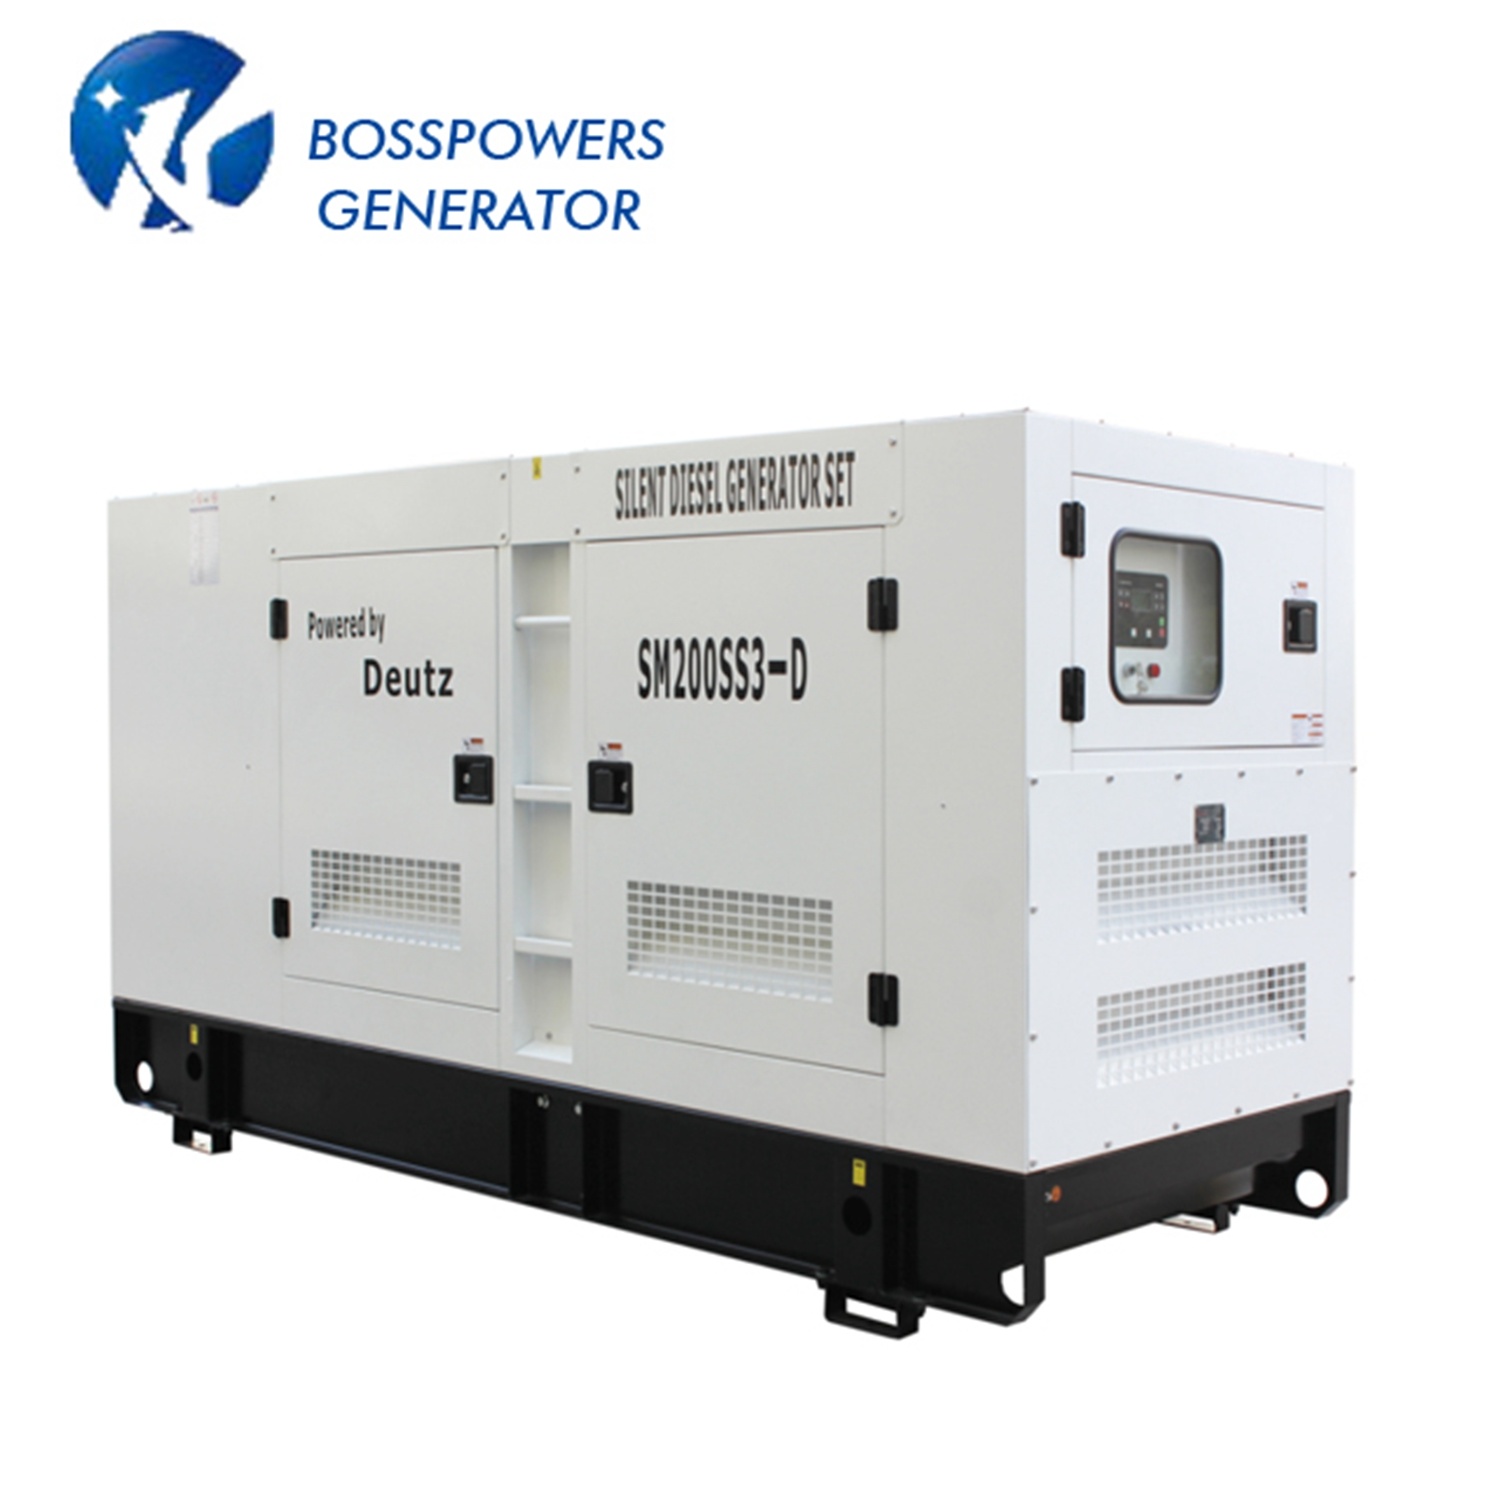 250kw Chinese Brand Wudong Soundproof Open Diesel Electric Generator